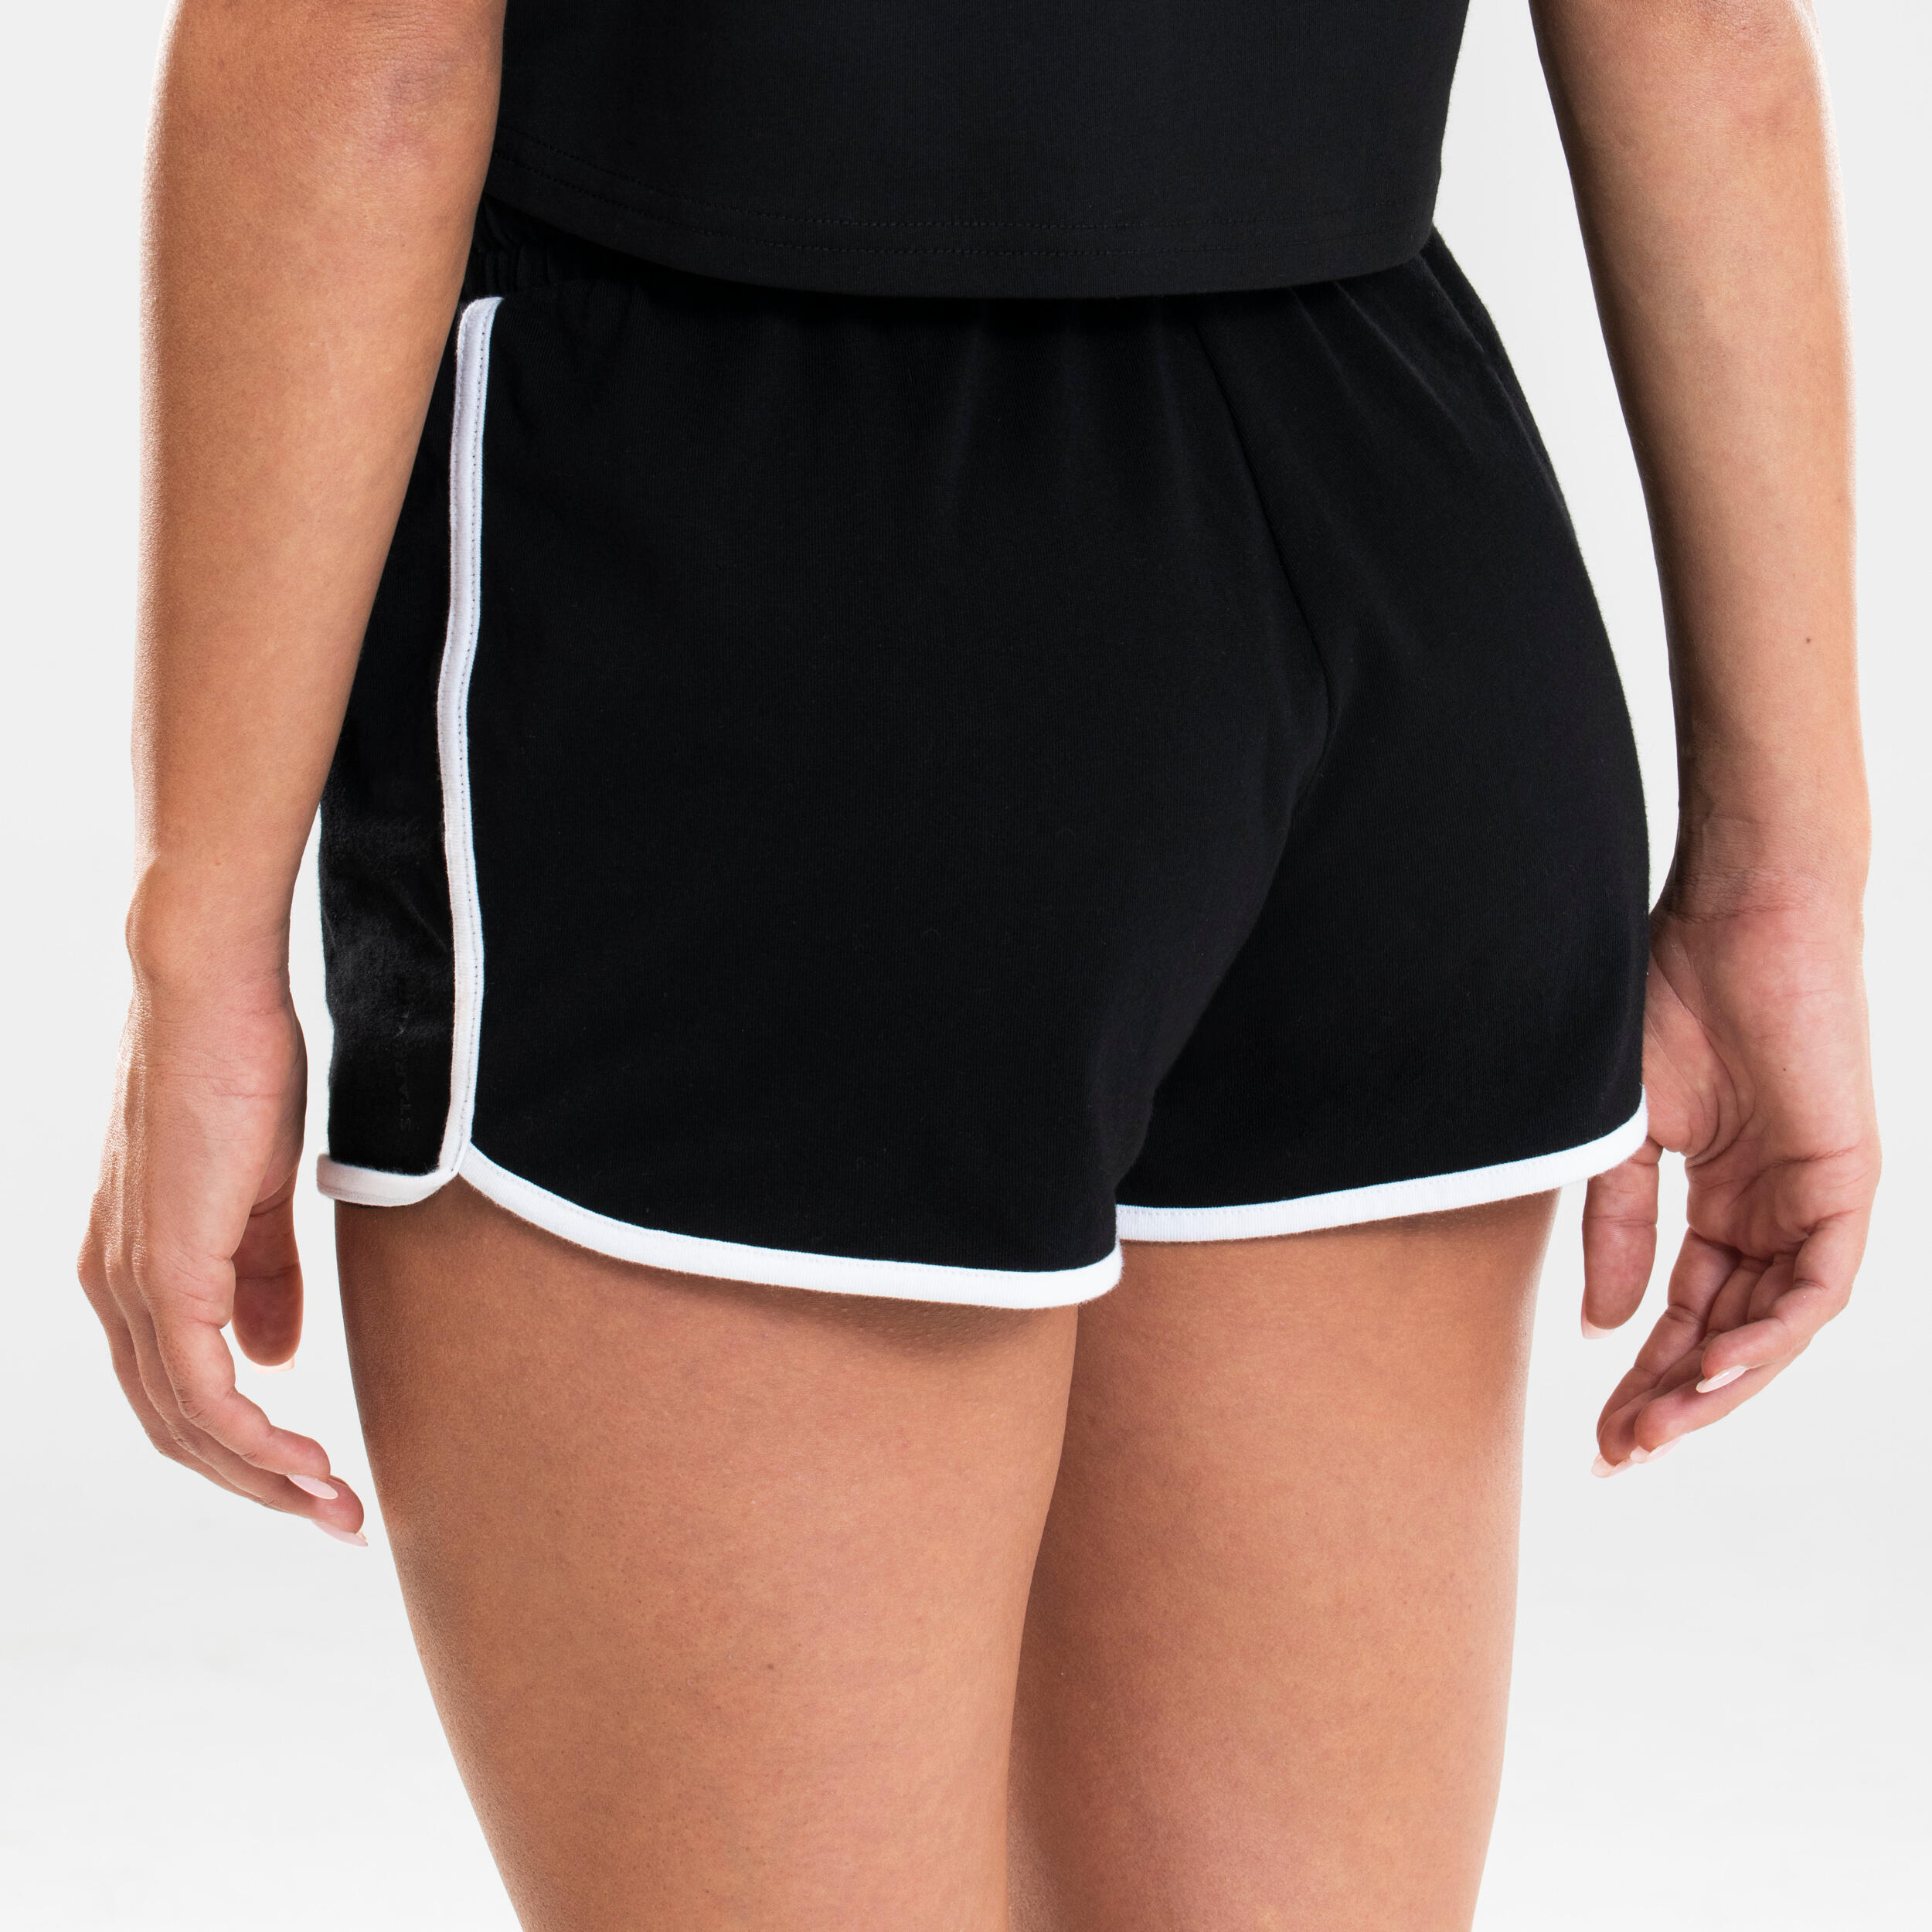 Women's Fitted Urban Dance Shorts - Black 3/7